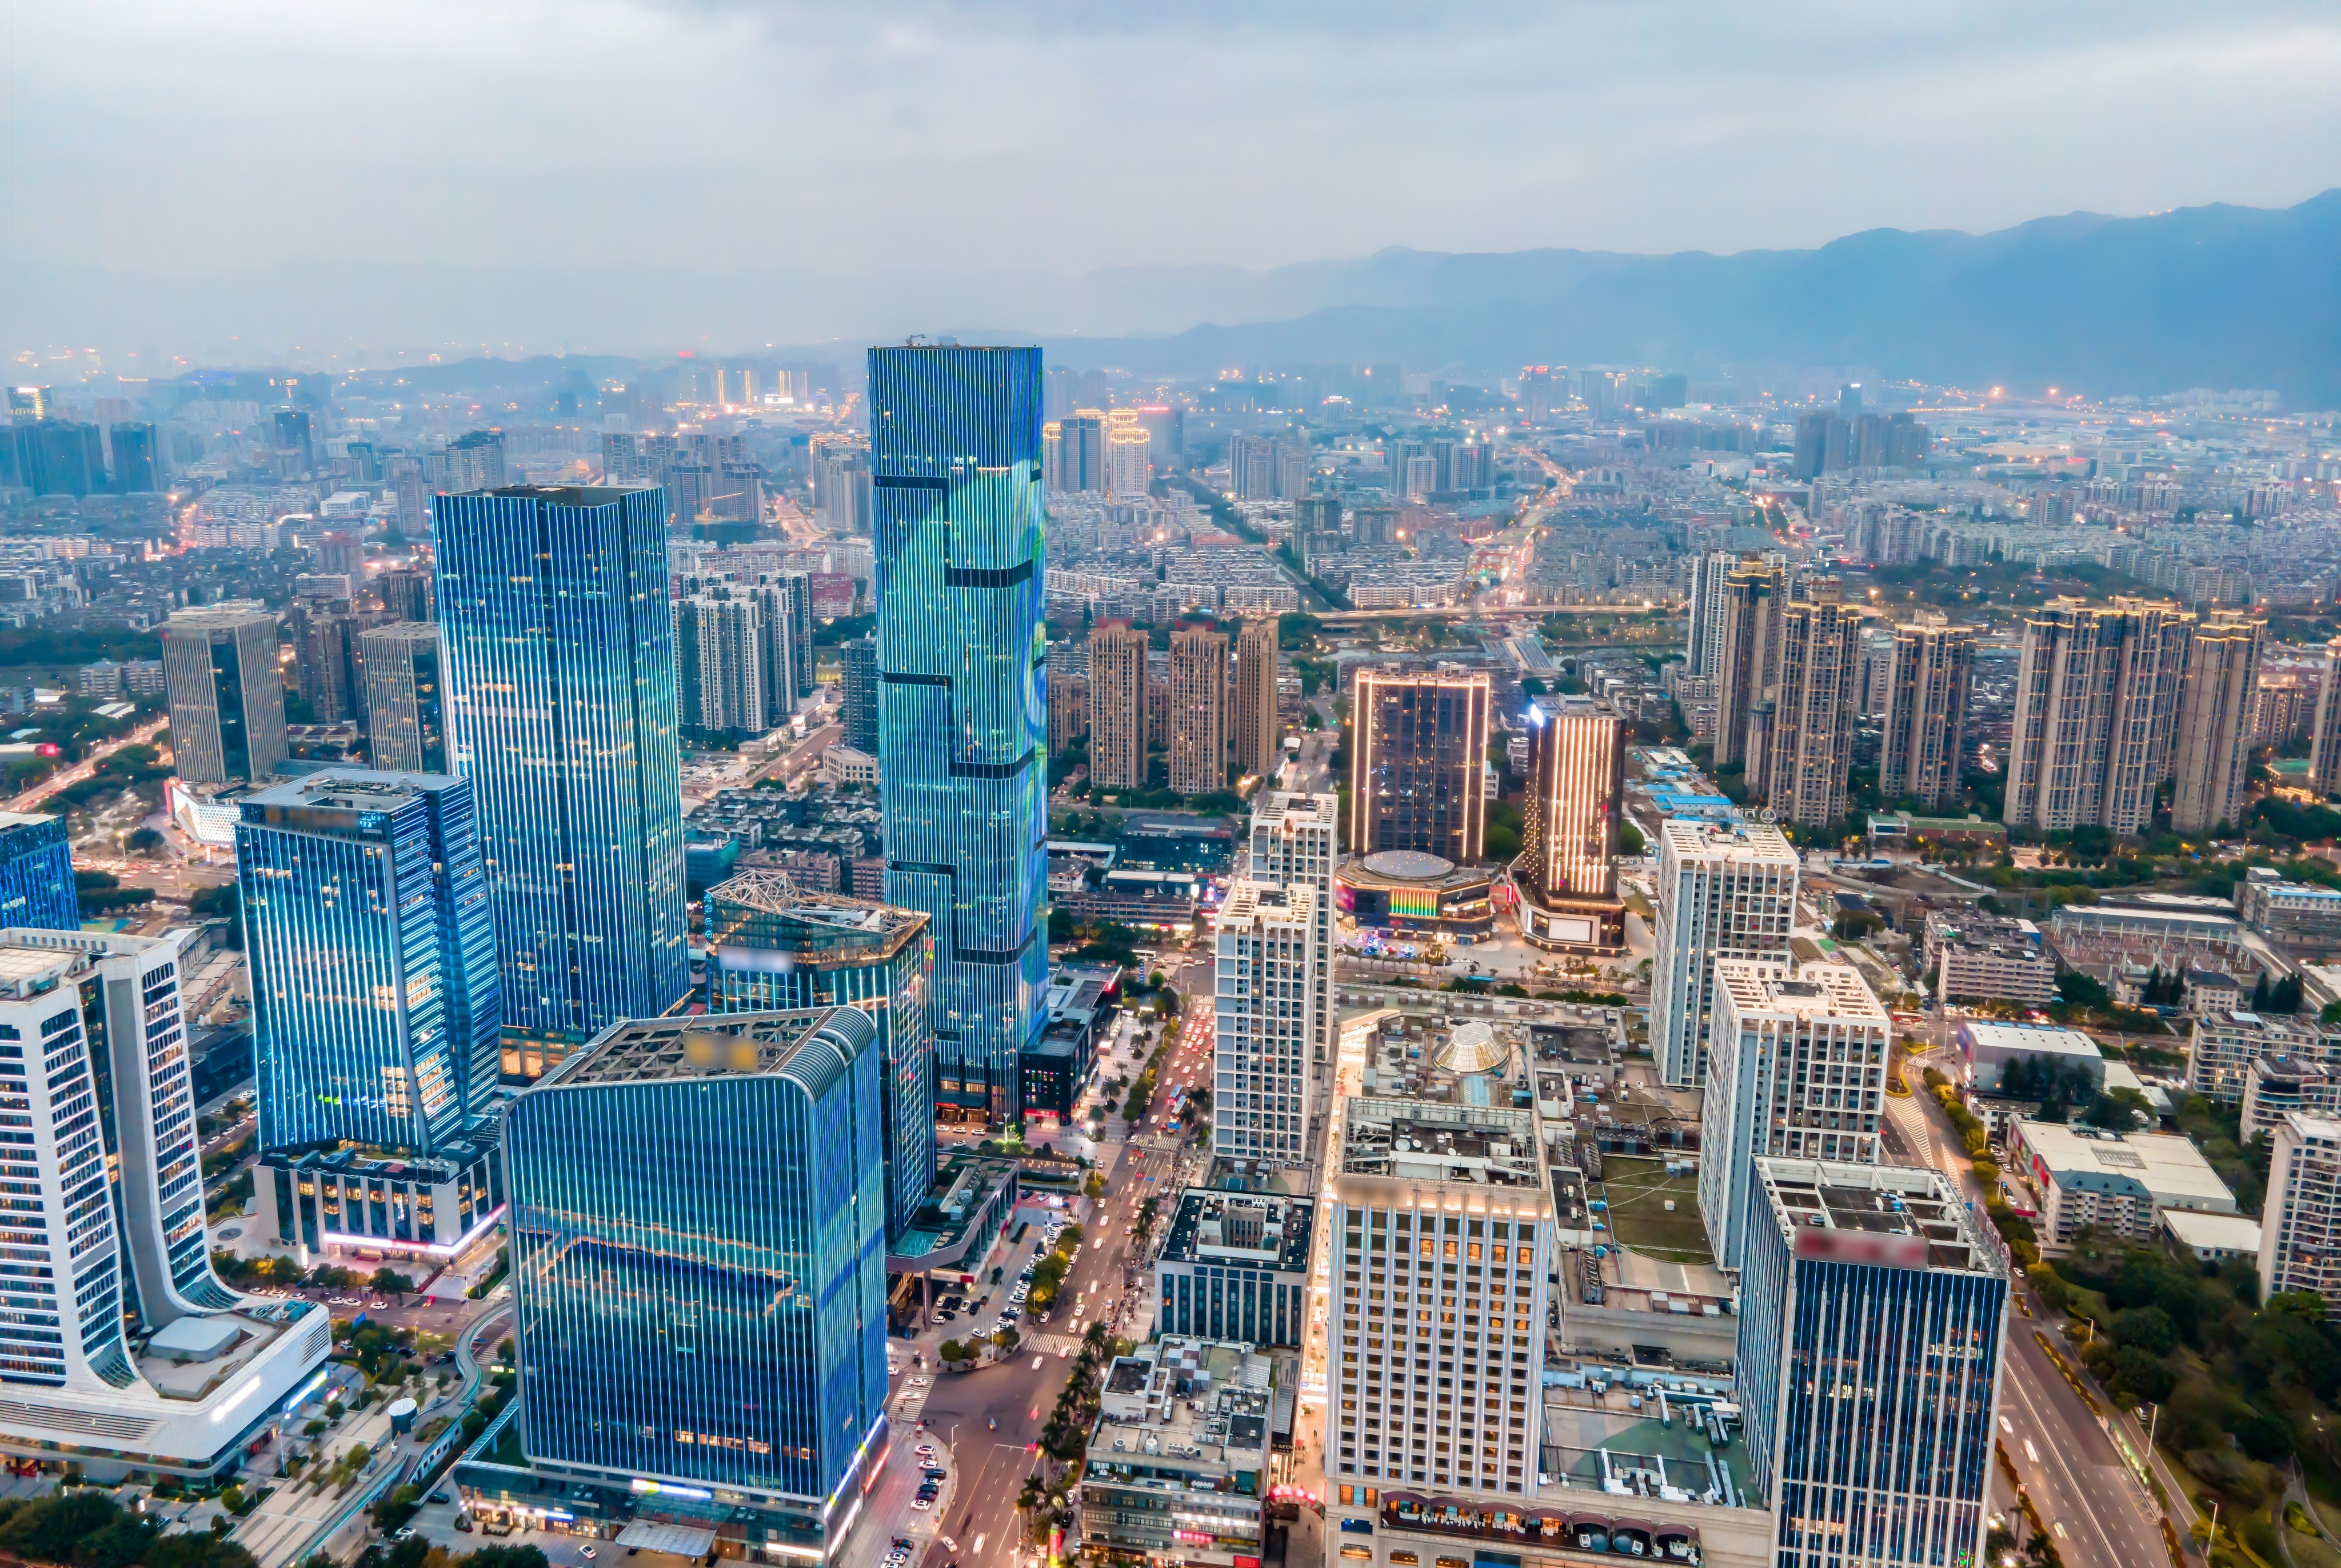 Fuzhou city, on the southern coast of mainland China in Fujian province, is offering a wide-ranging package of opportunities for residents of Taiwanese-controlled Matsu. Photo: Shutterstock